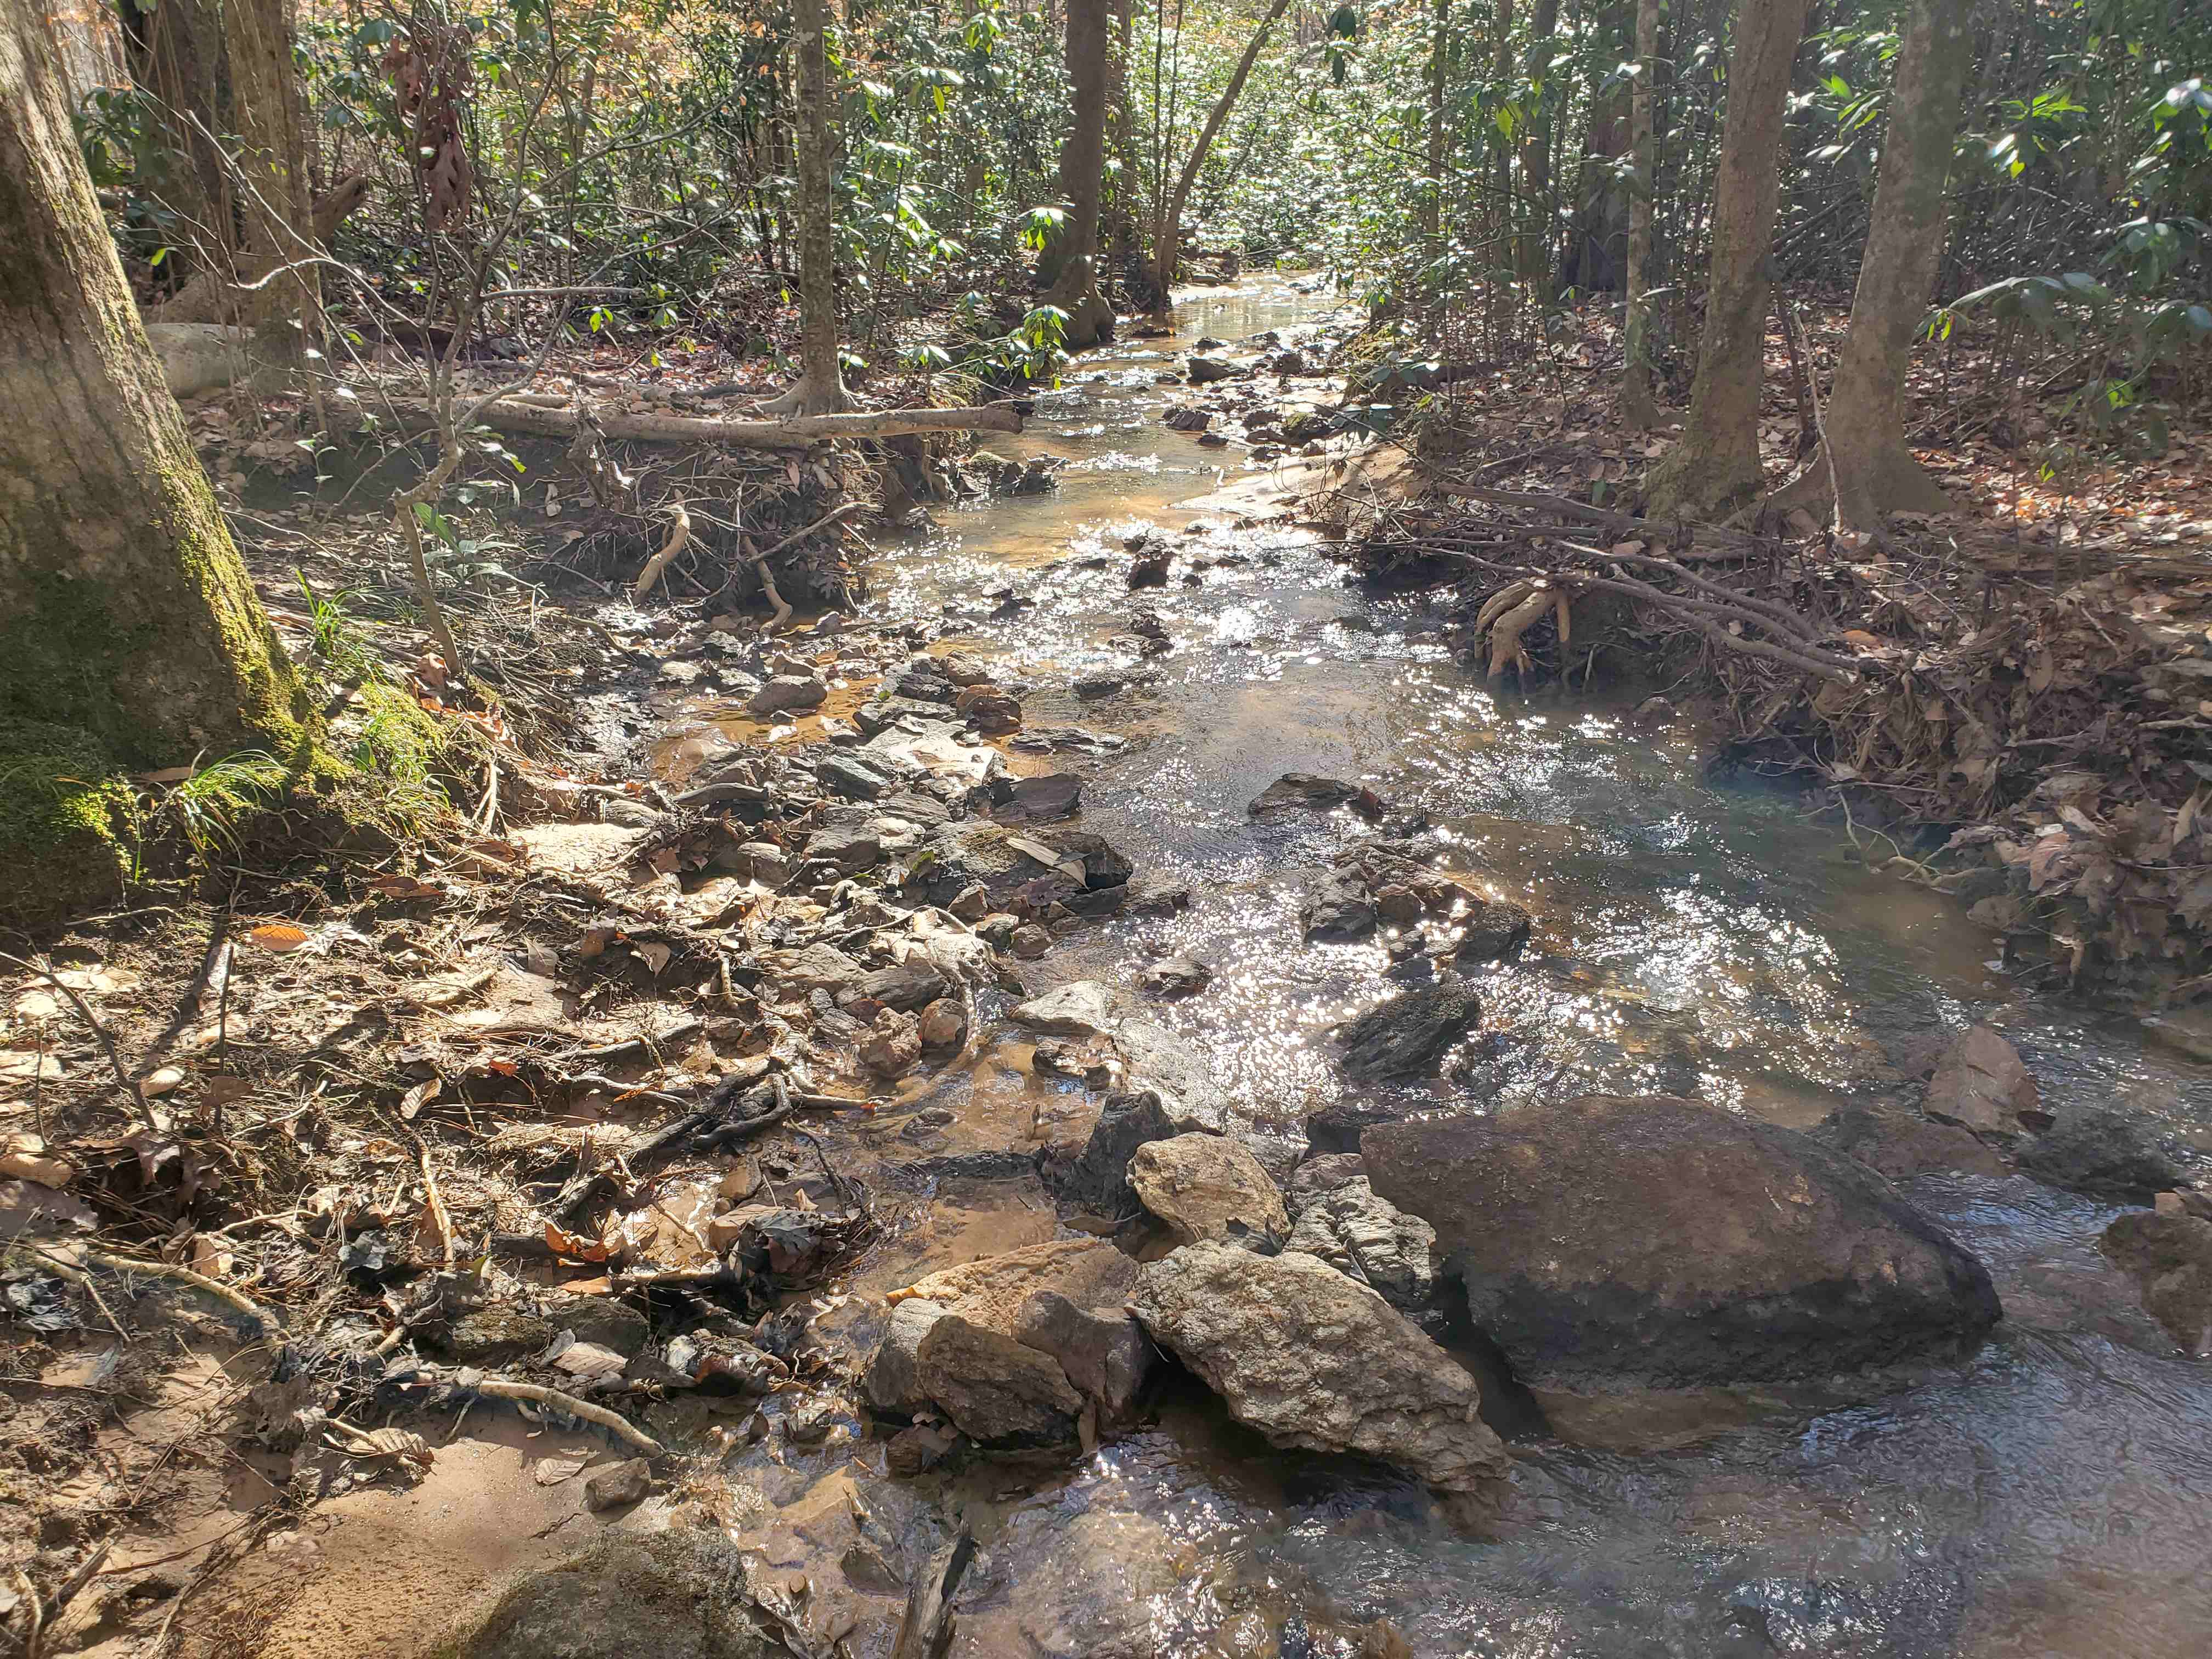 This rocky stream runs from east to west and is a possible location for a pond